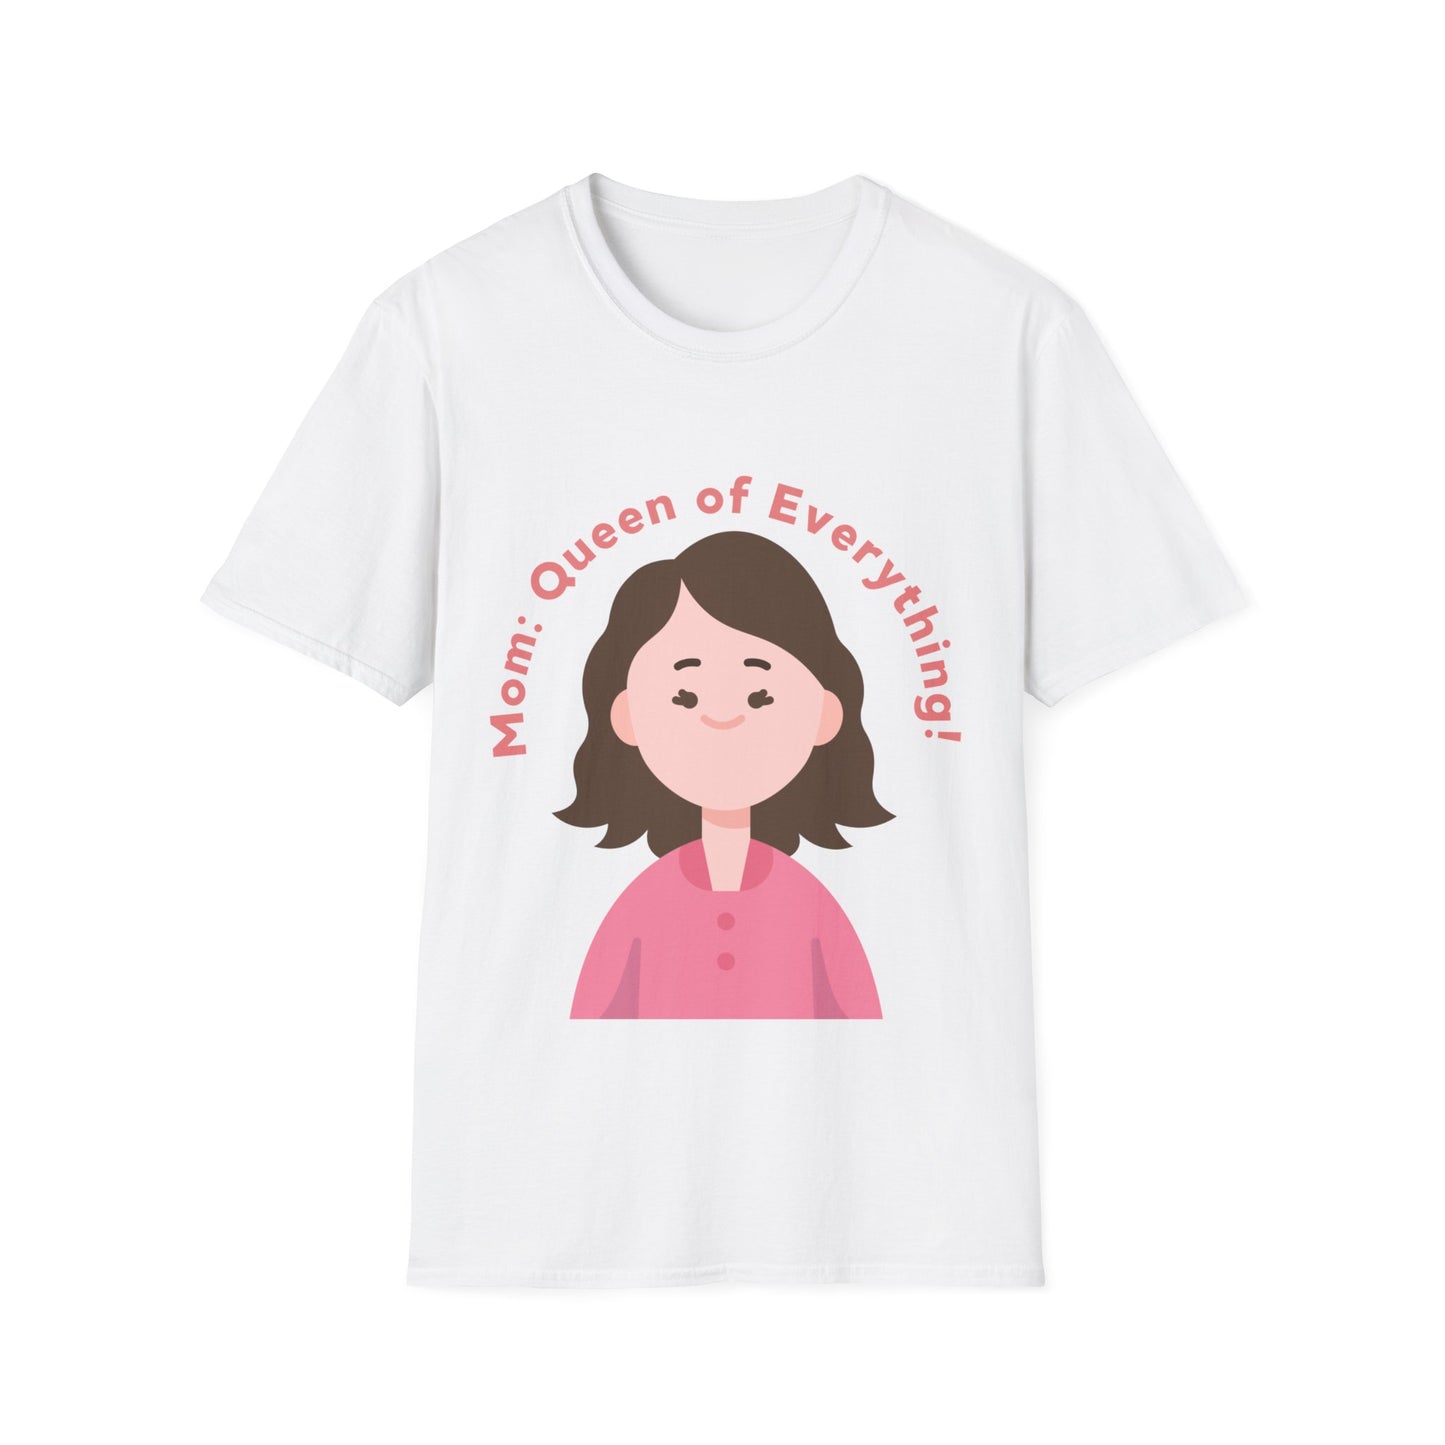 Women's Softstyle T-Shirt for MOM